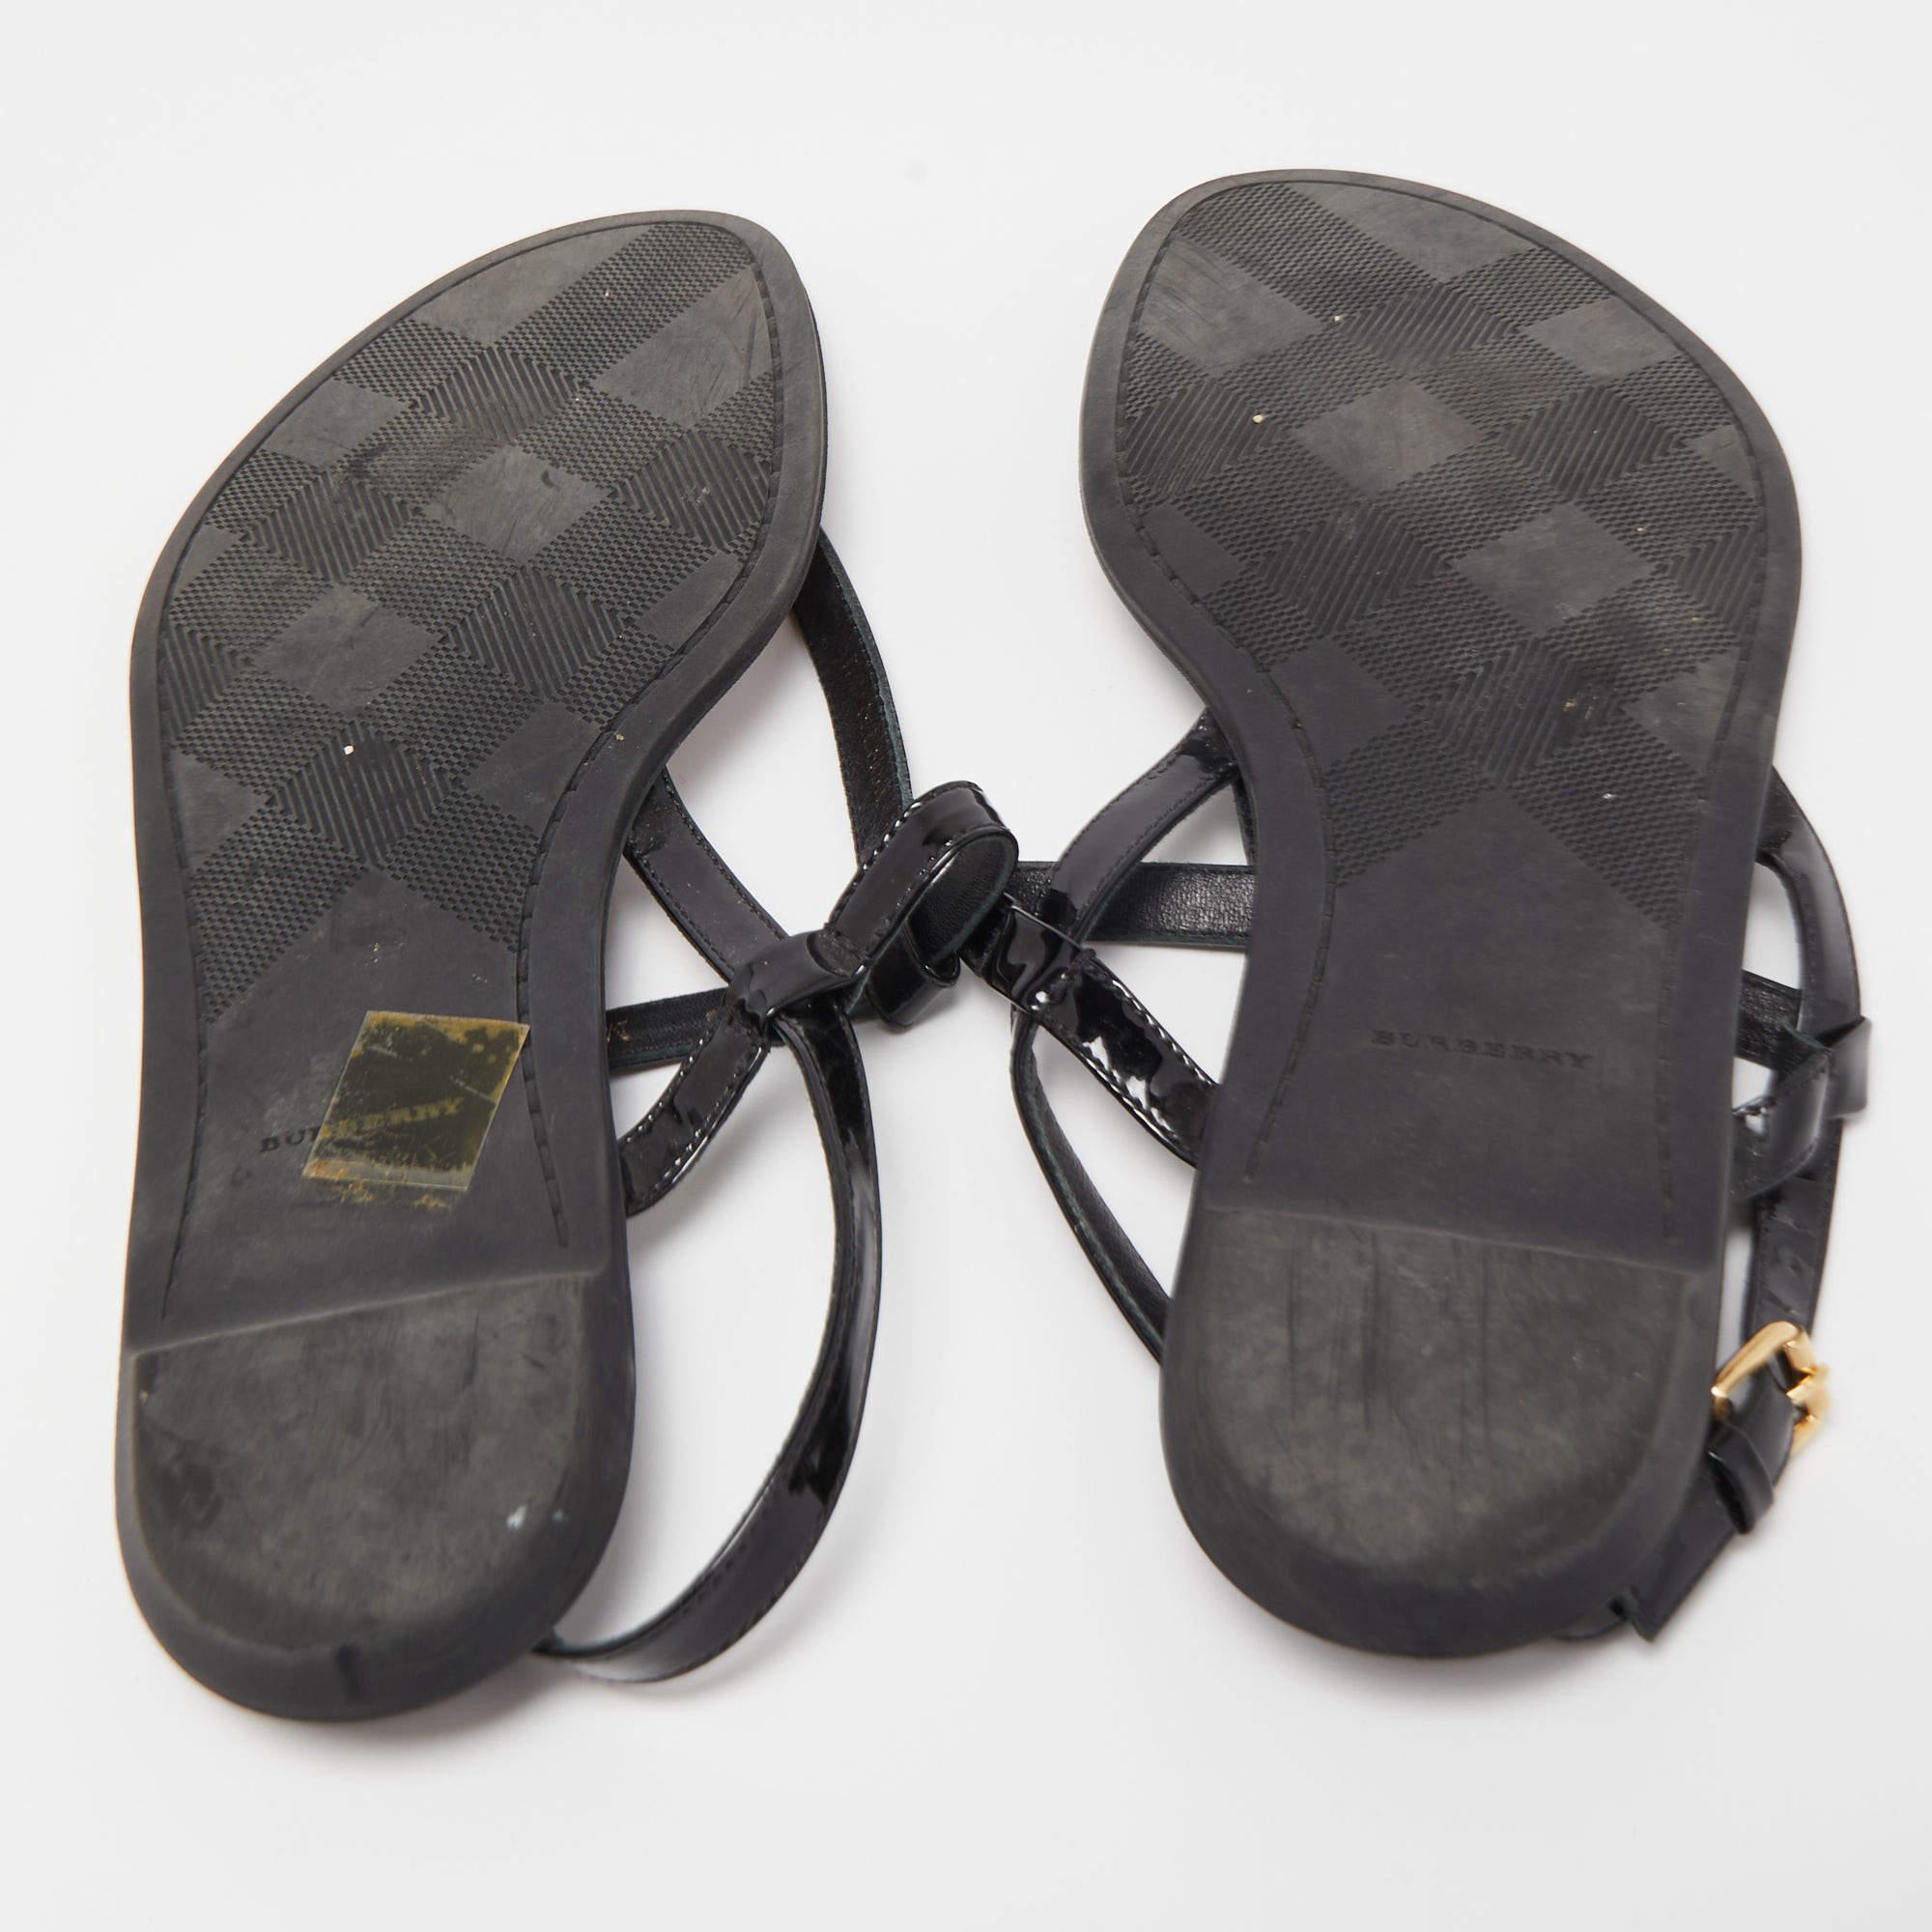 Burberry Black Patent Leather Thong Flat Sandals Size 36 1